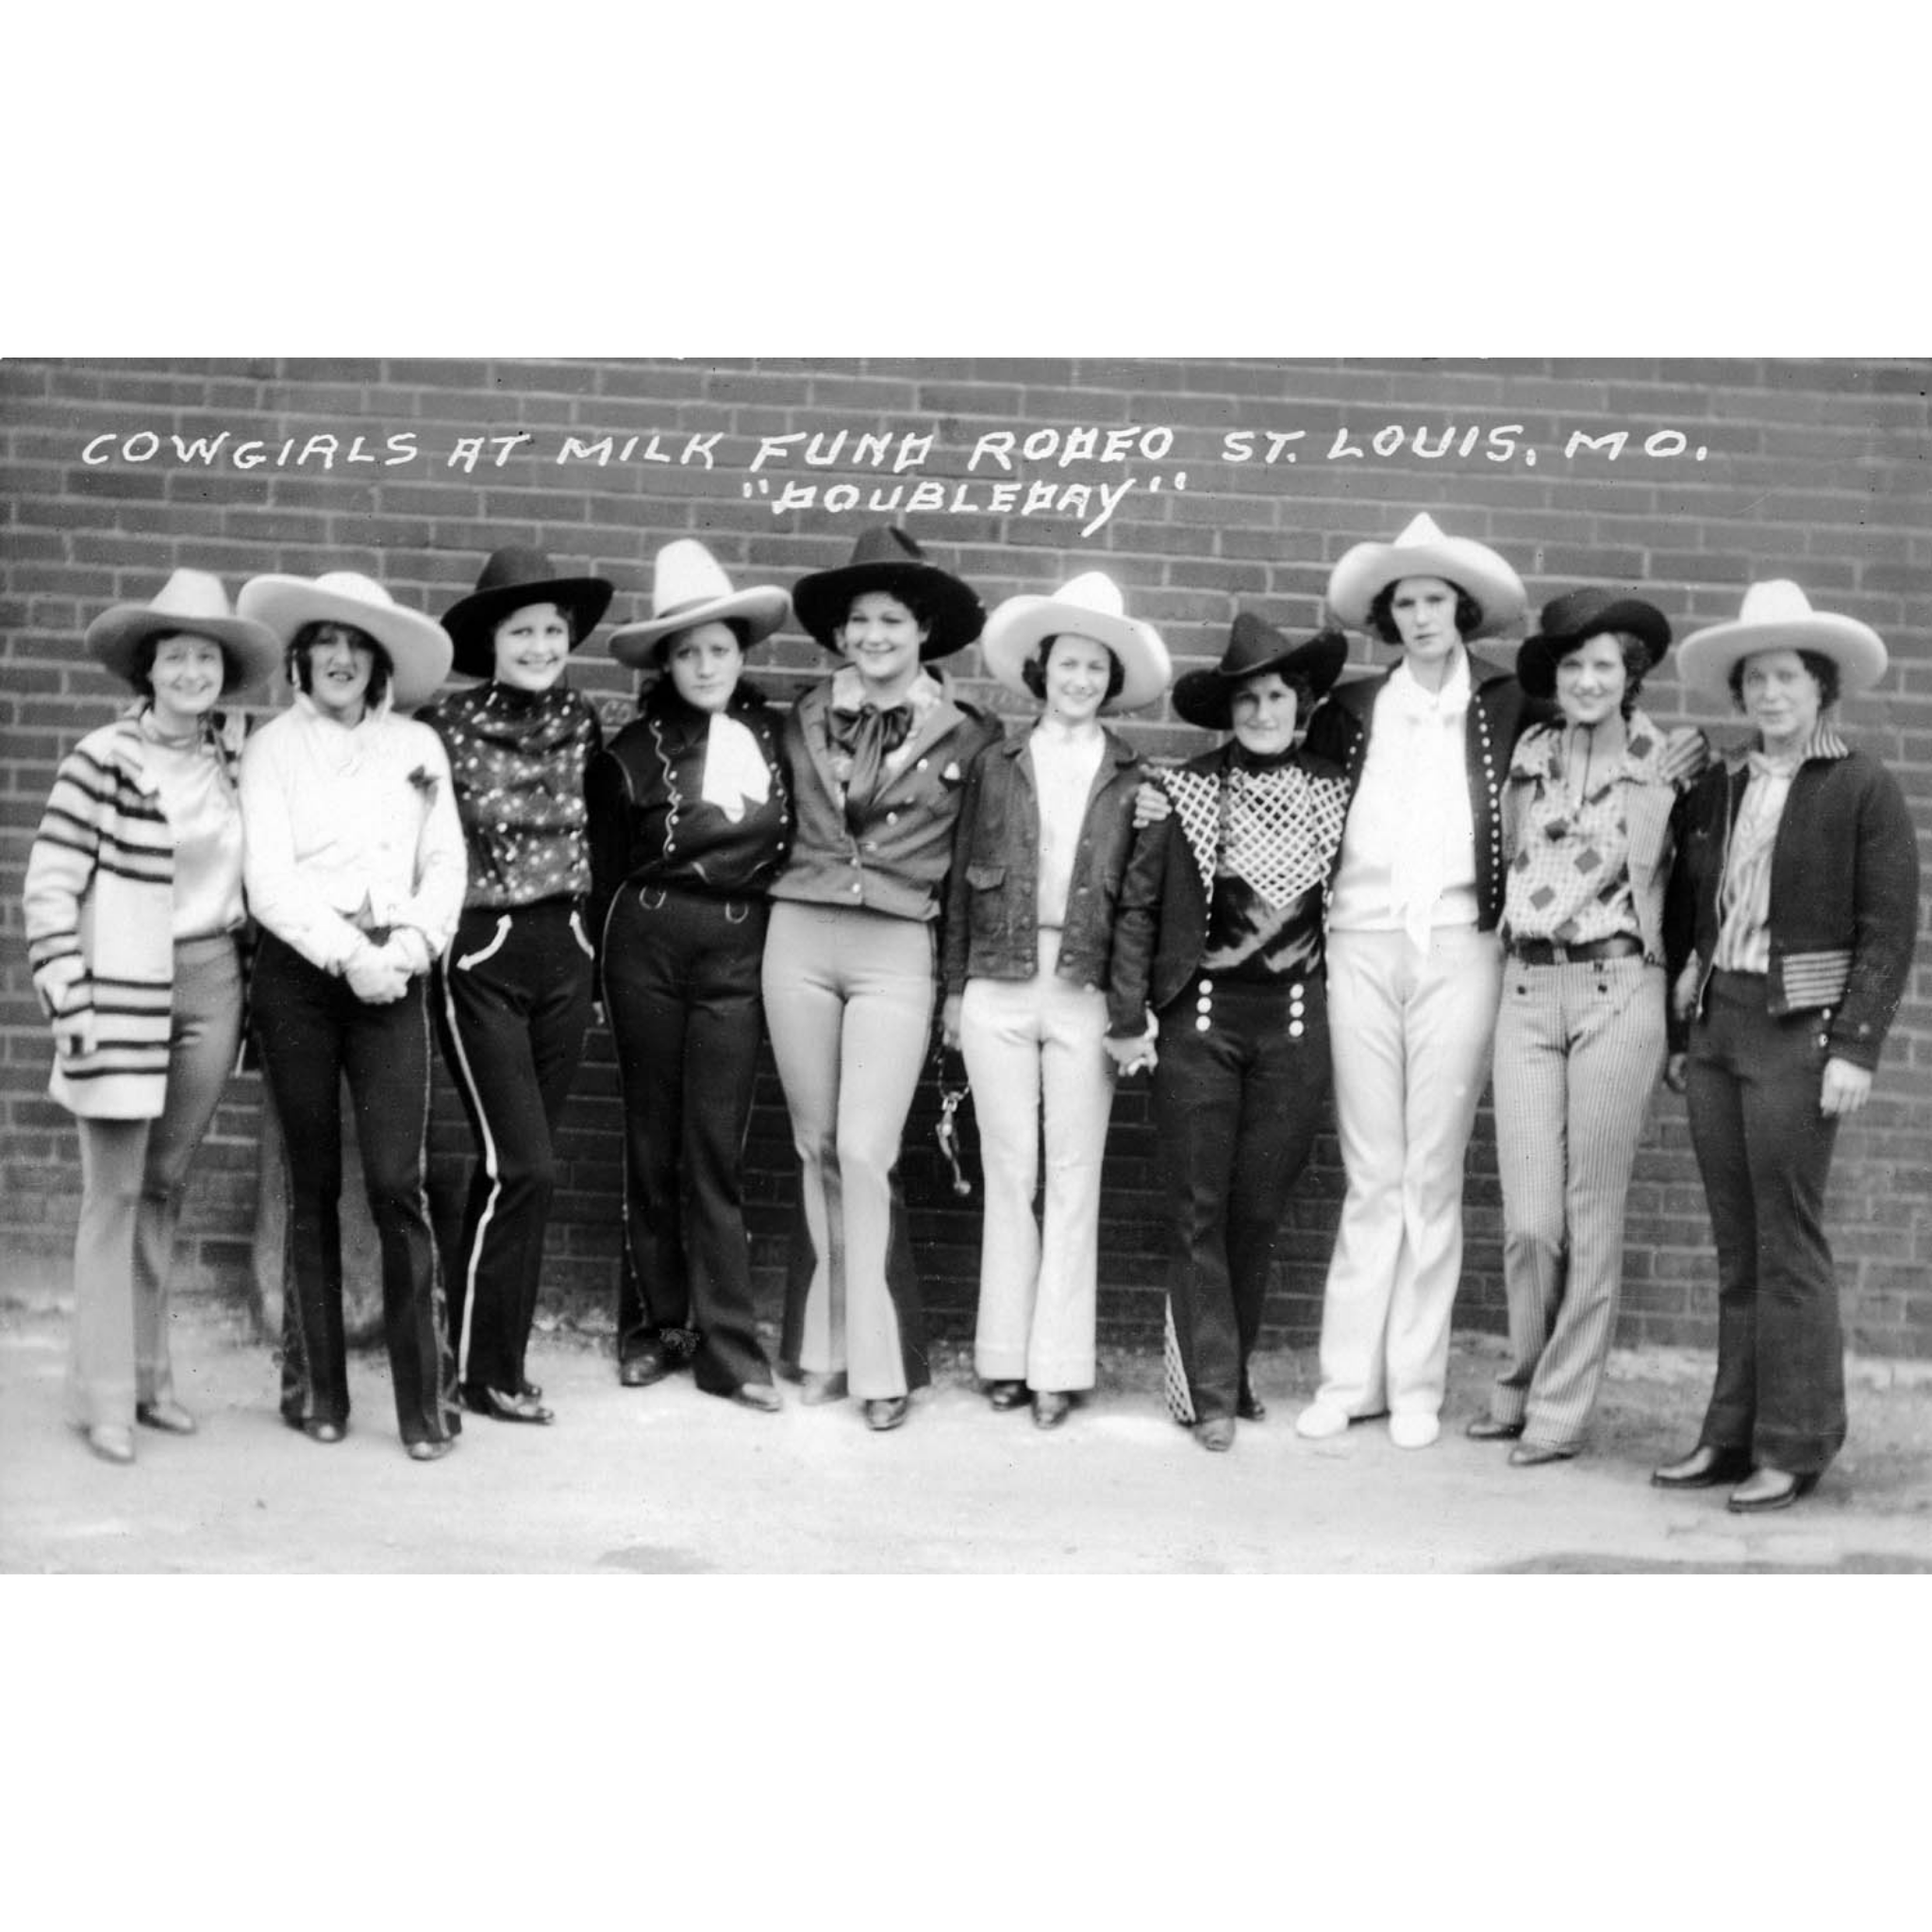 Cowgirls at Milk Fund Rodeo St Louis - Doubleday - ca. 1925 Photograph